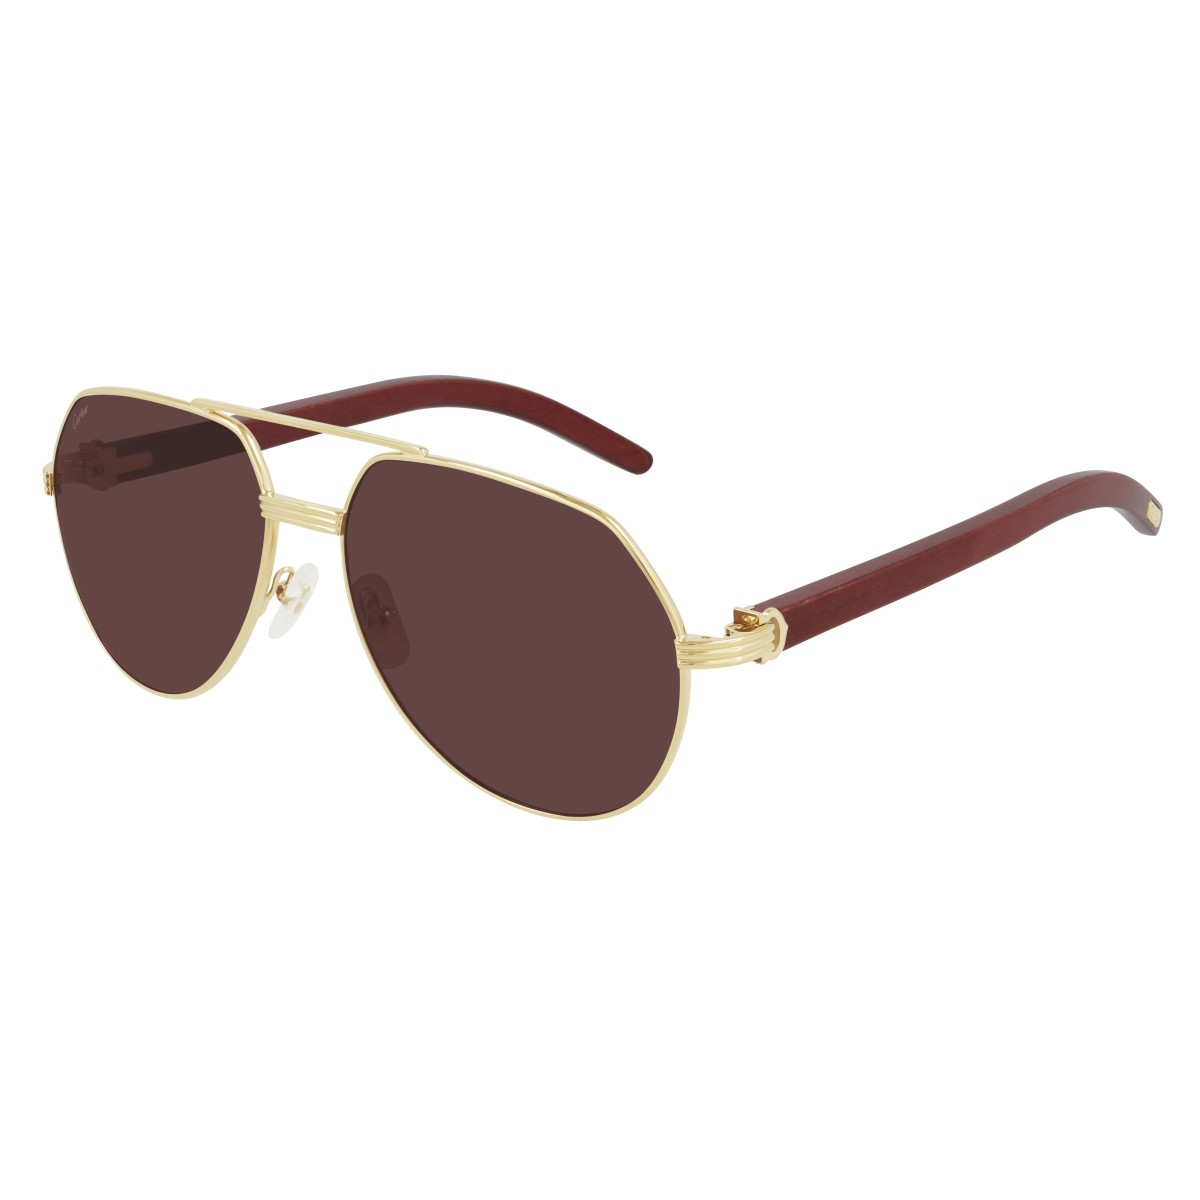 Cartier - CT0272S 004 Gold/Brown